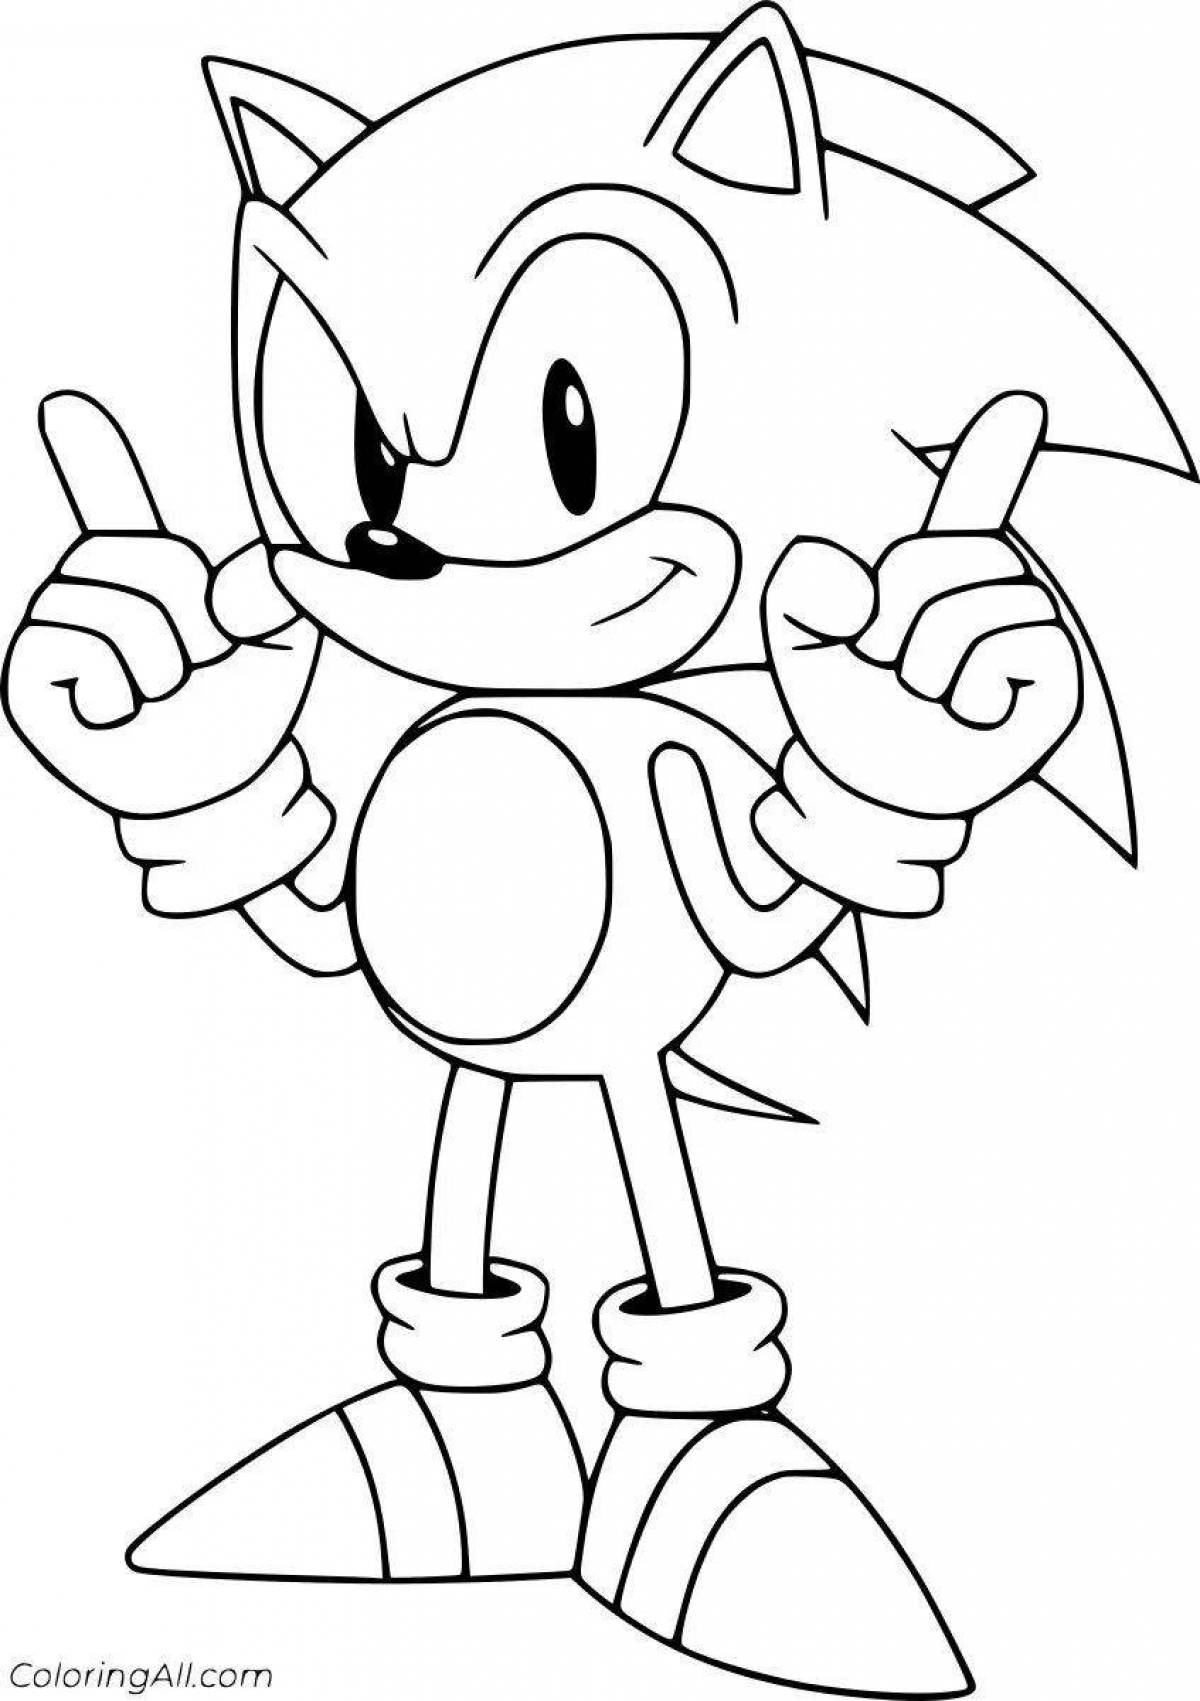 Engaging super hedgehog sonic coloring page